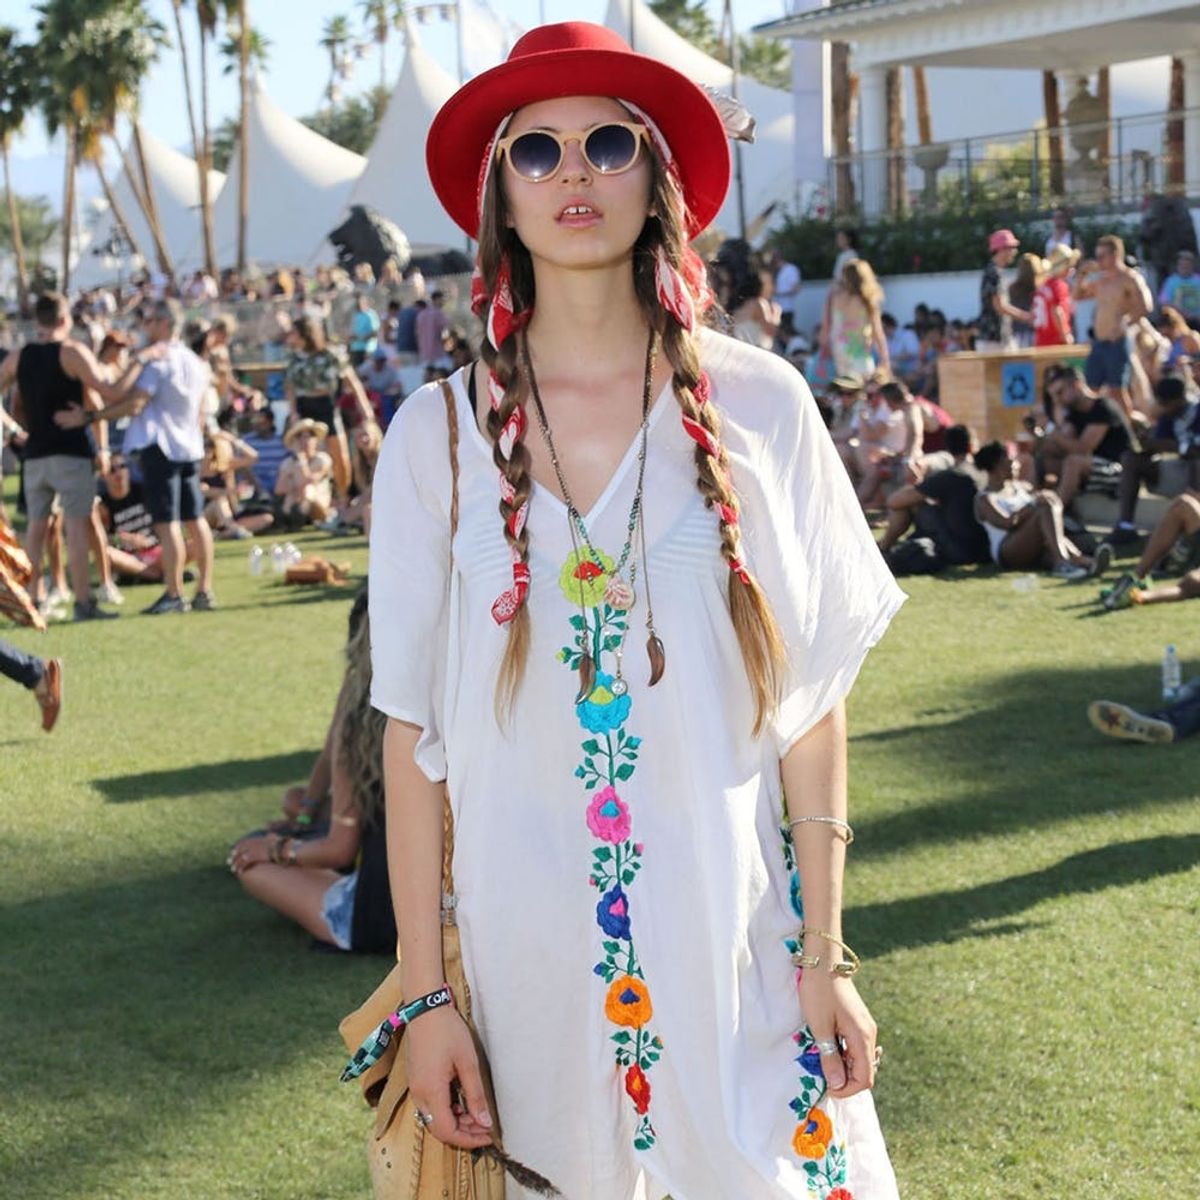 East Coasters, Rejoice! New York Will Get Their Own Version of Coachella